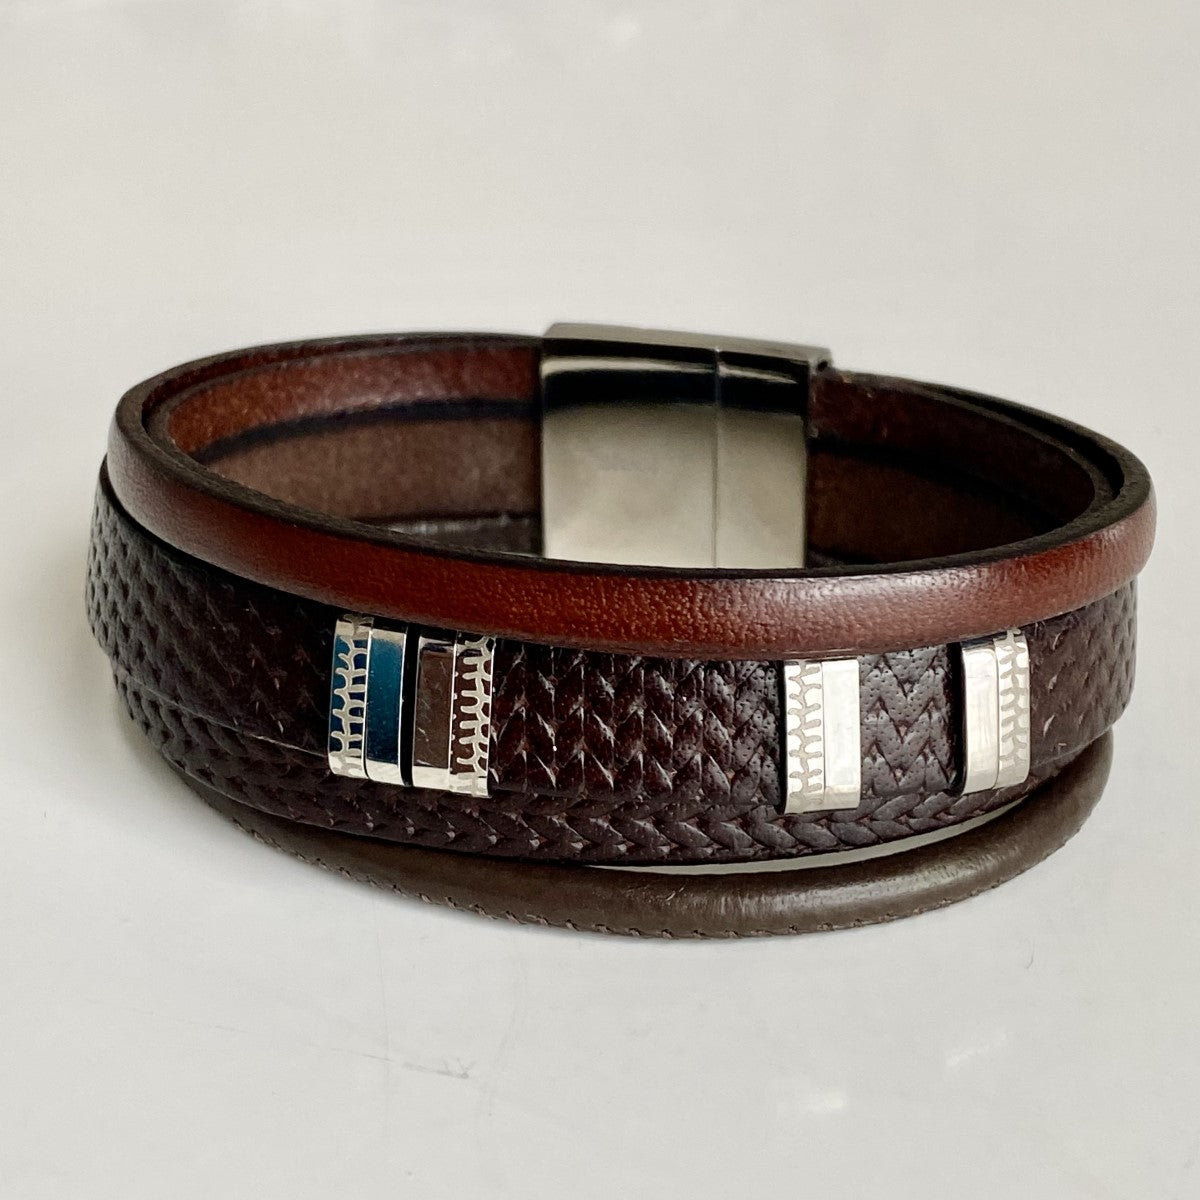 Men's Brown Nappa Leather Bracelet with 5 Bands, Spacers and a Magnetic Stainless Steel Clasp